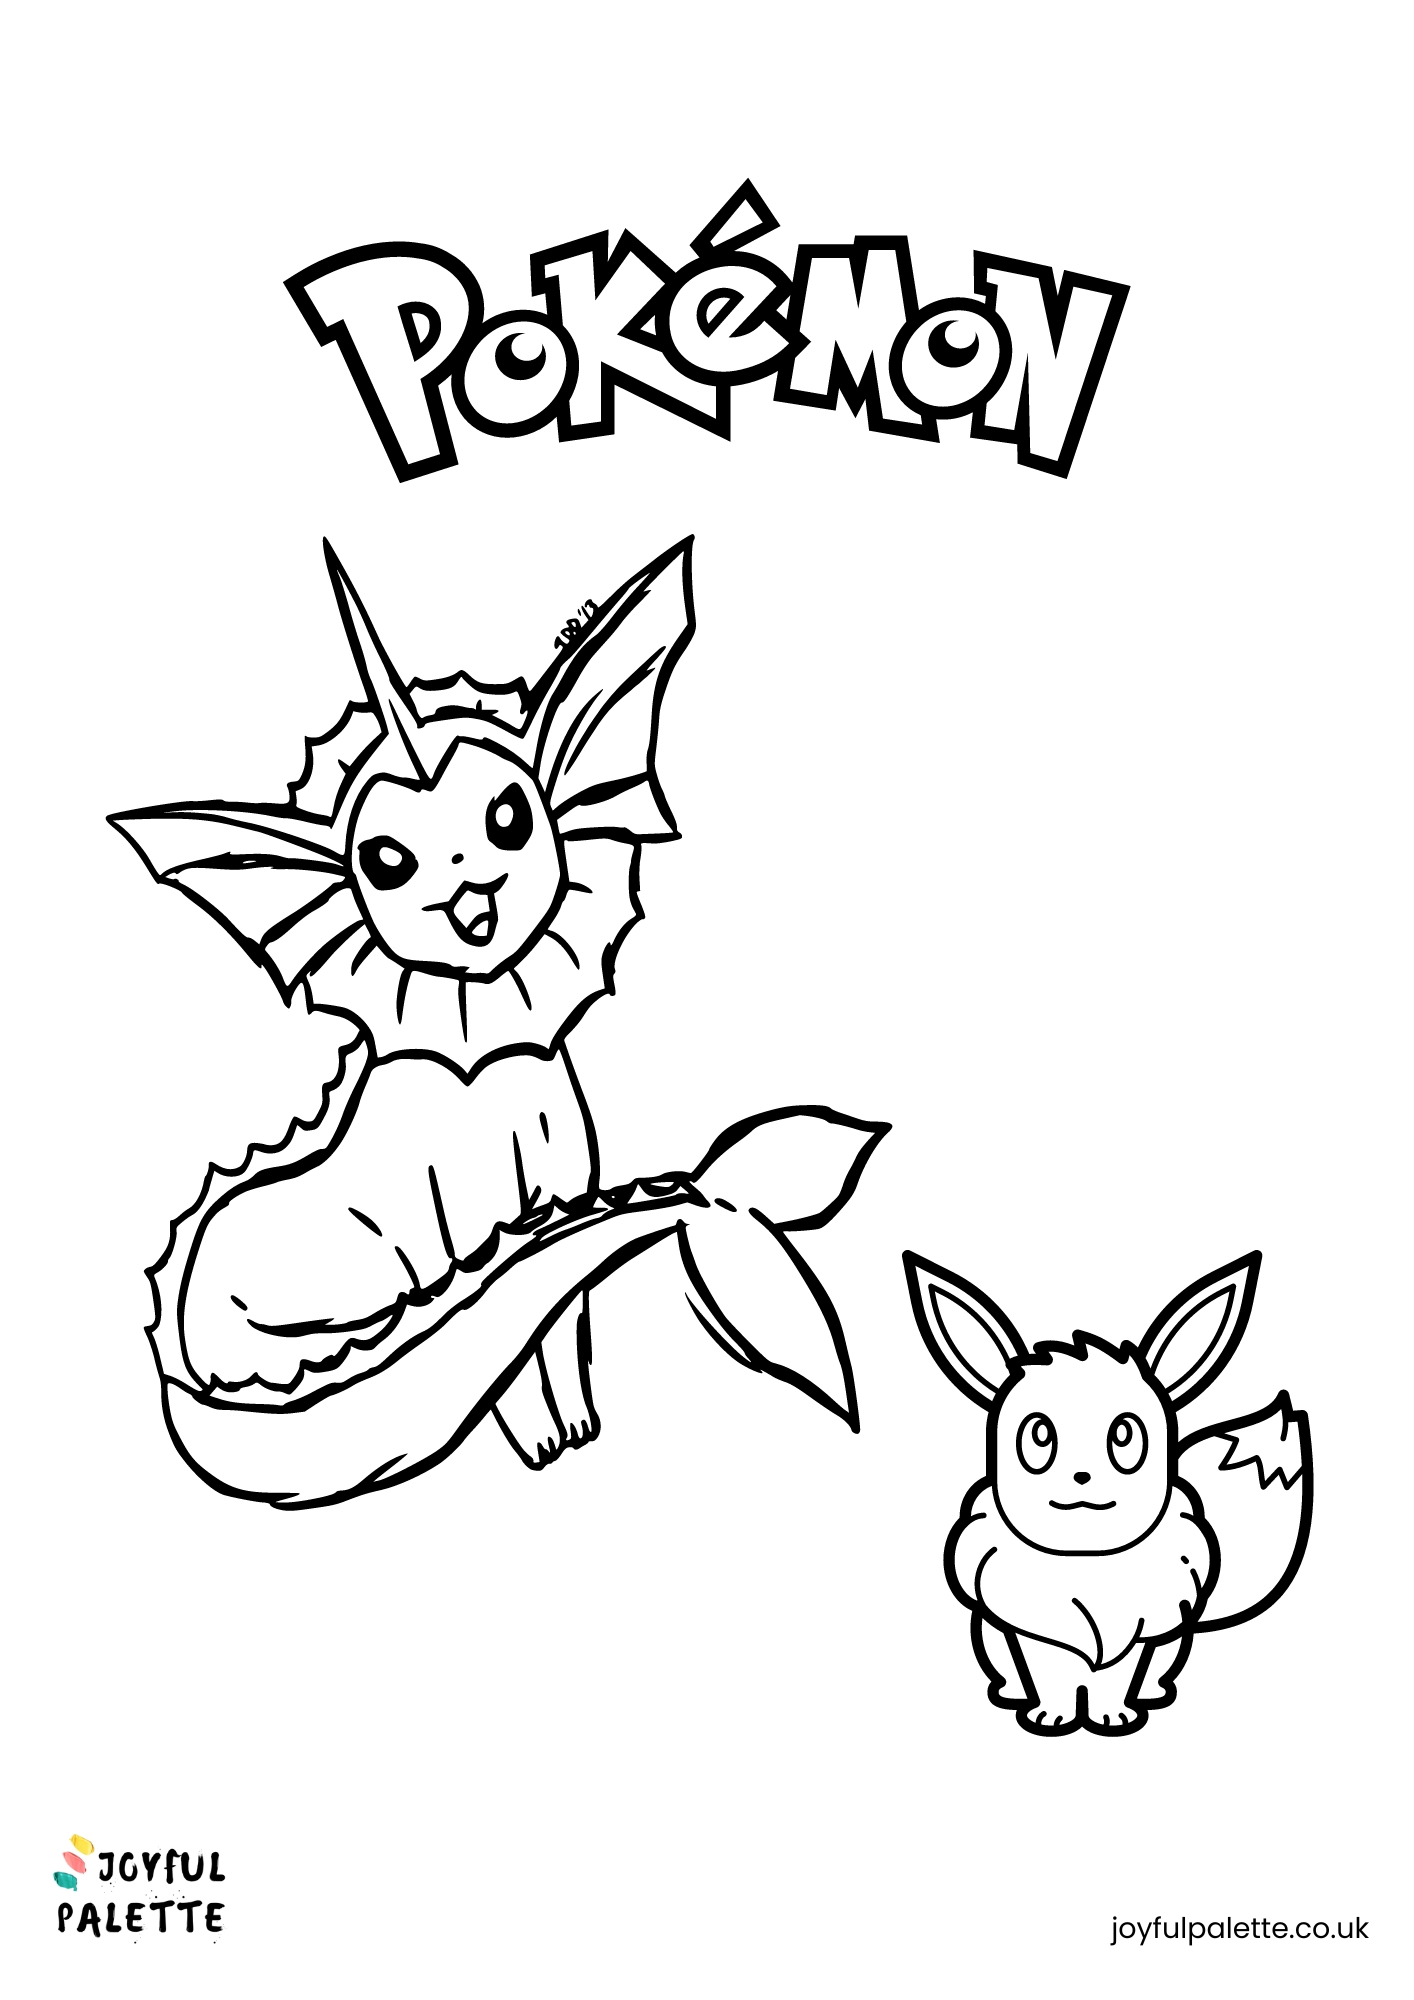 Eevee and Vaporeon coloring page